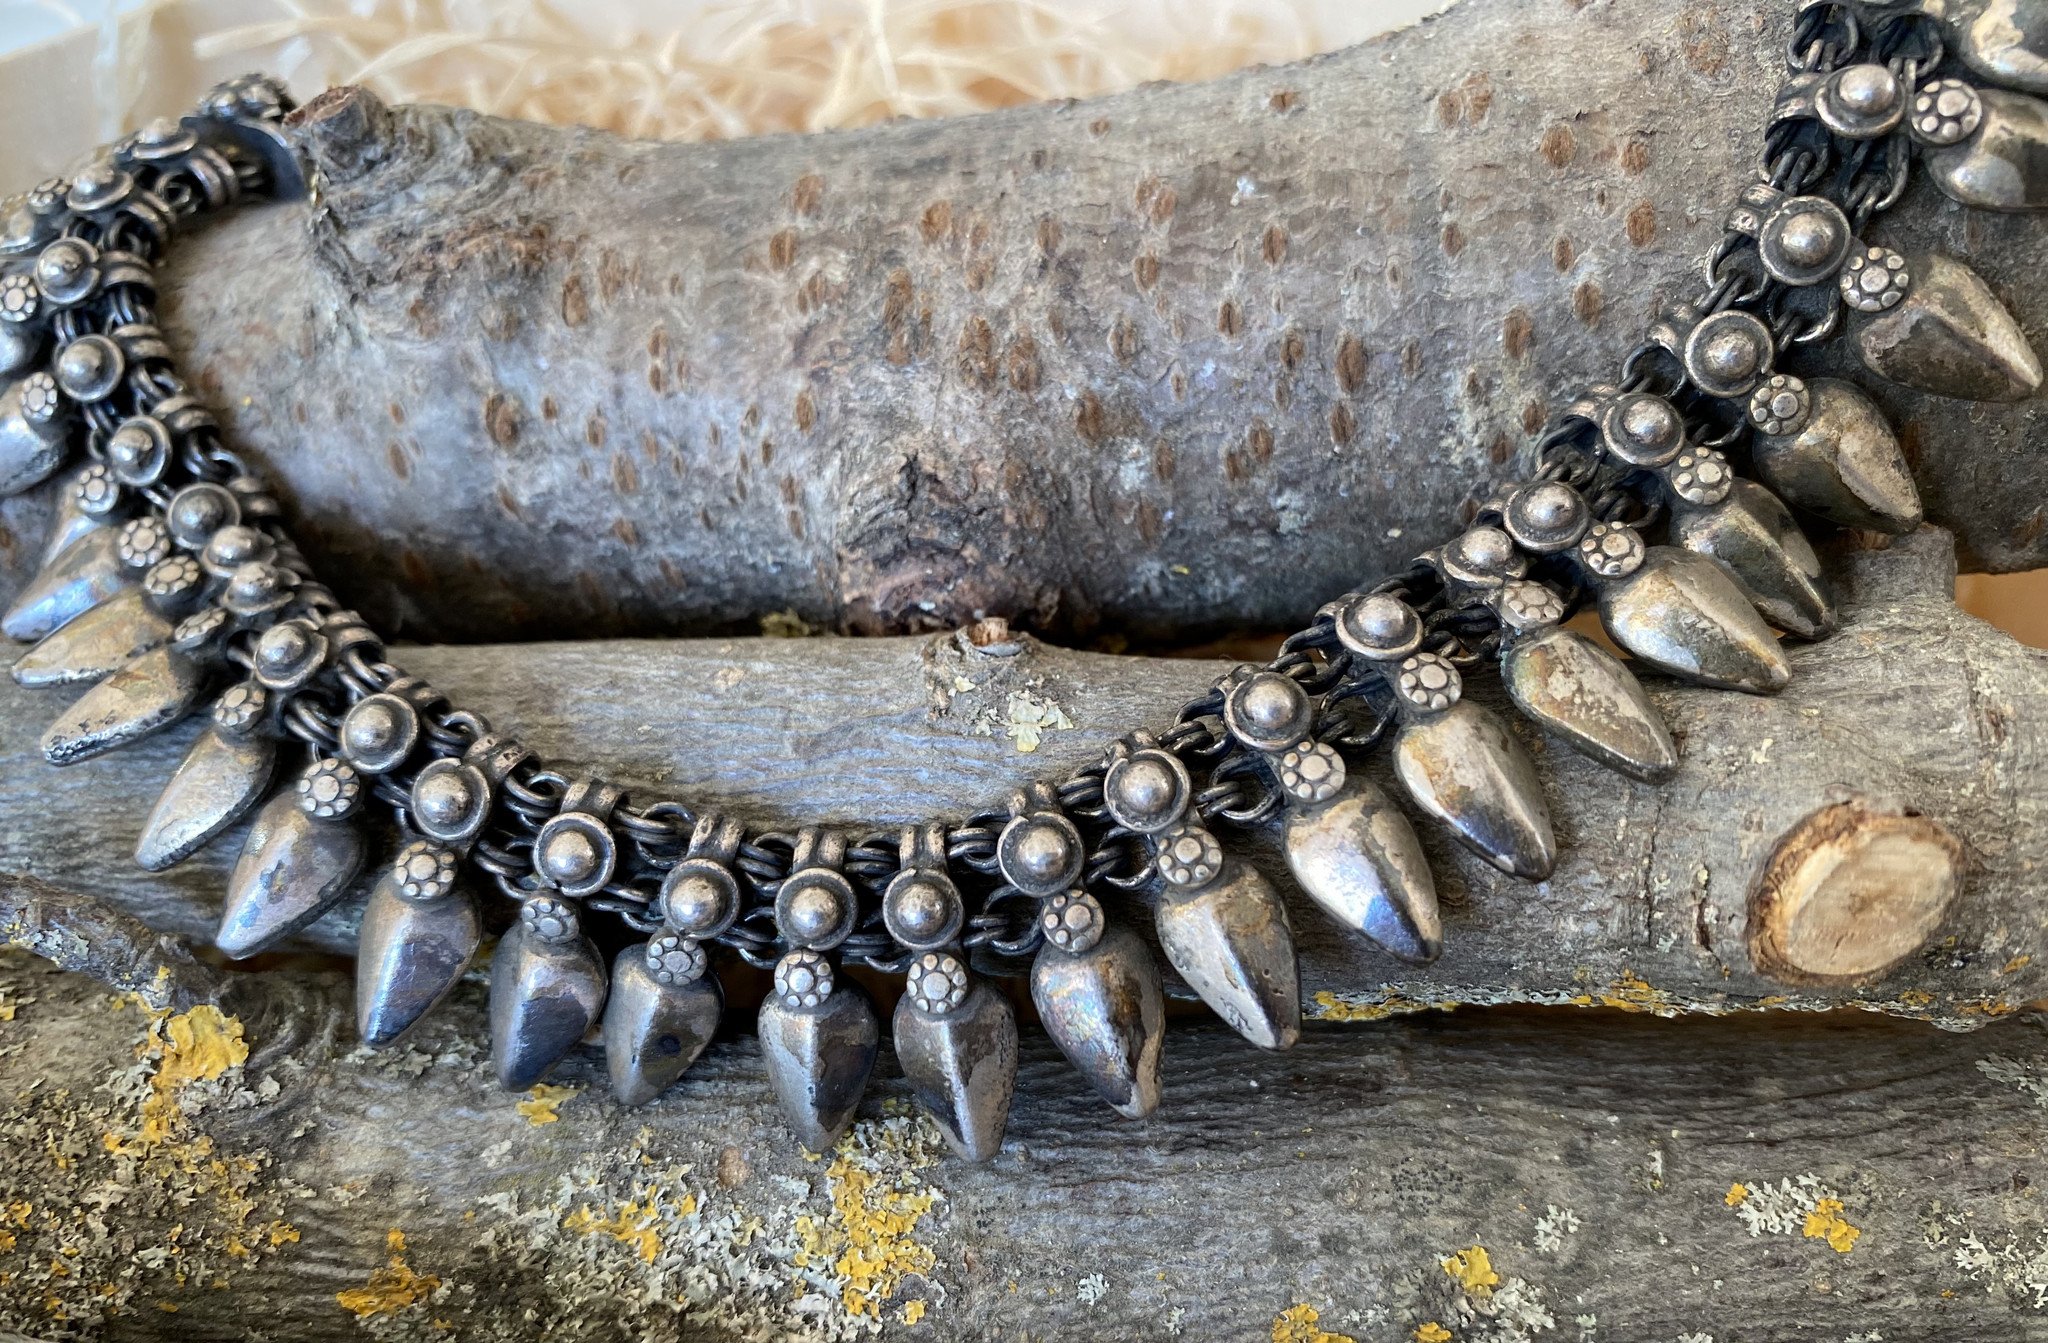 Tribal German silver necklace